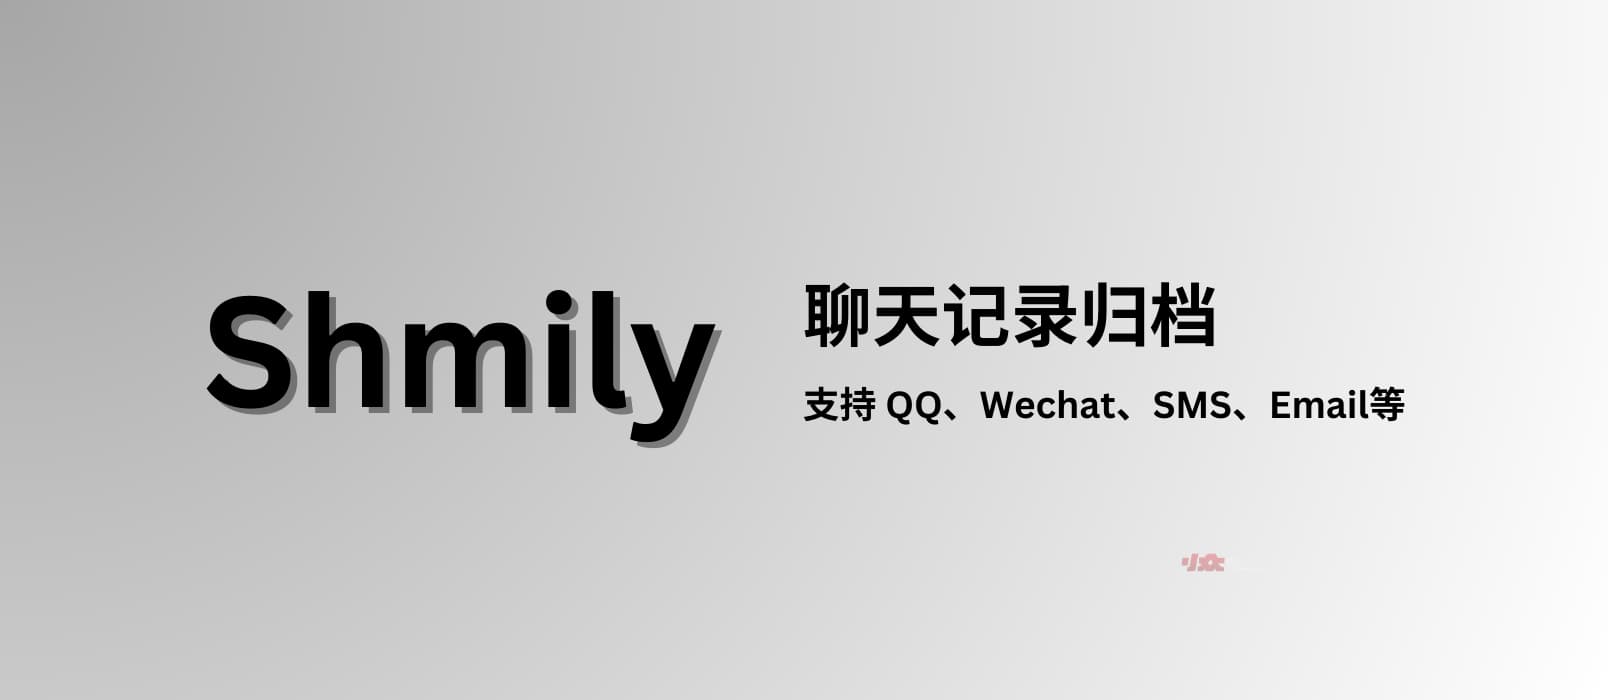 Shmily – 聊天记录归档，支持 QQ、WeChat、SMS、Email 等